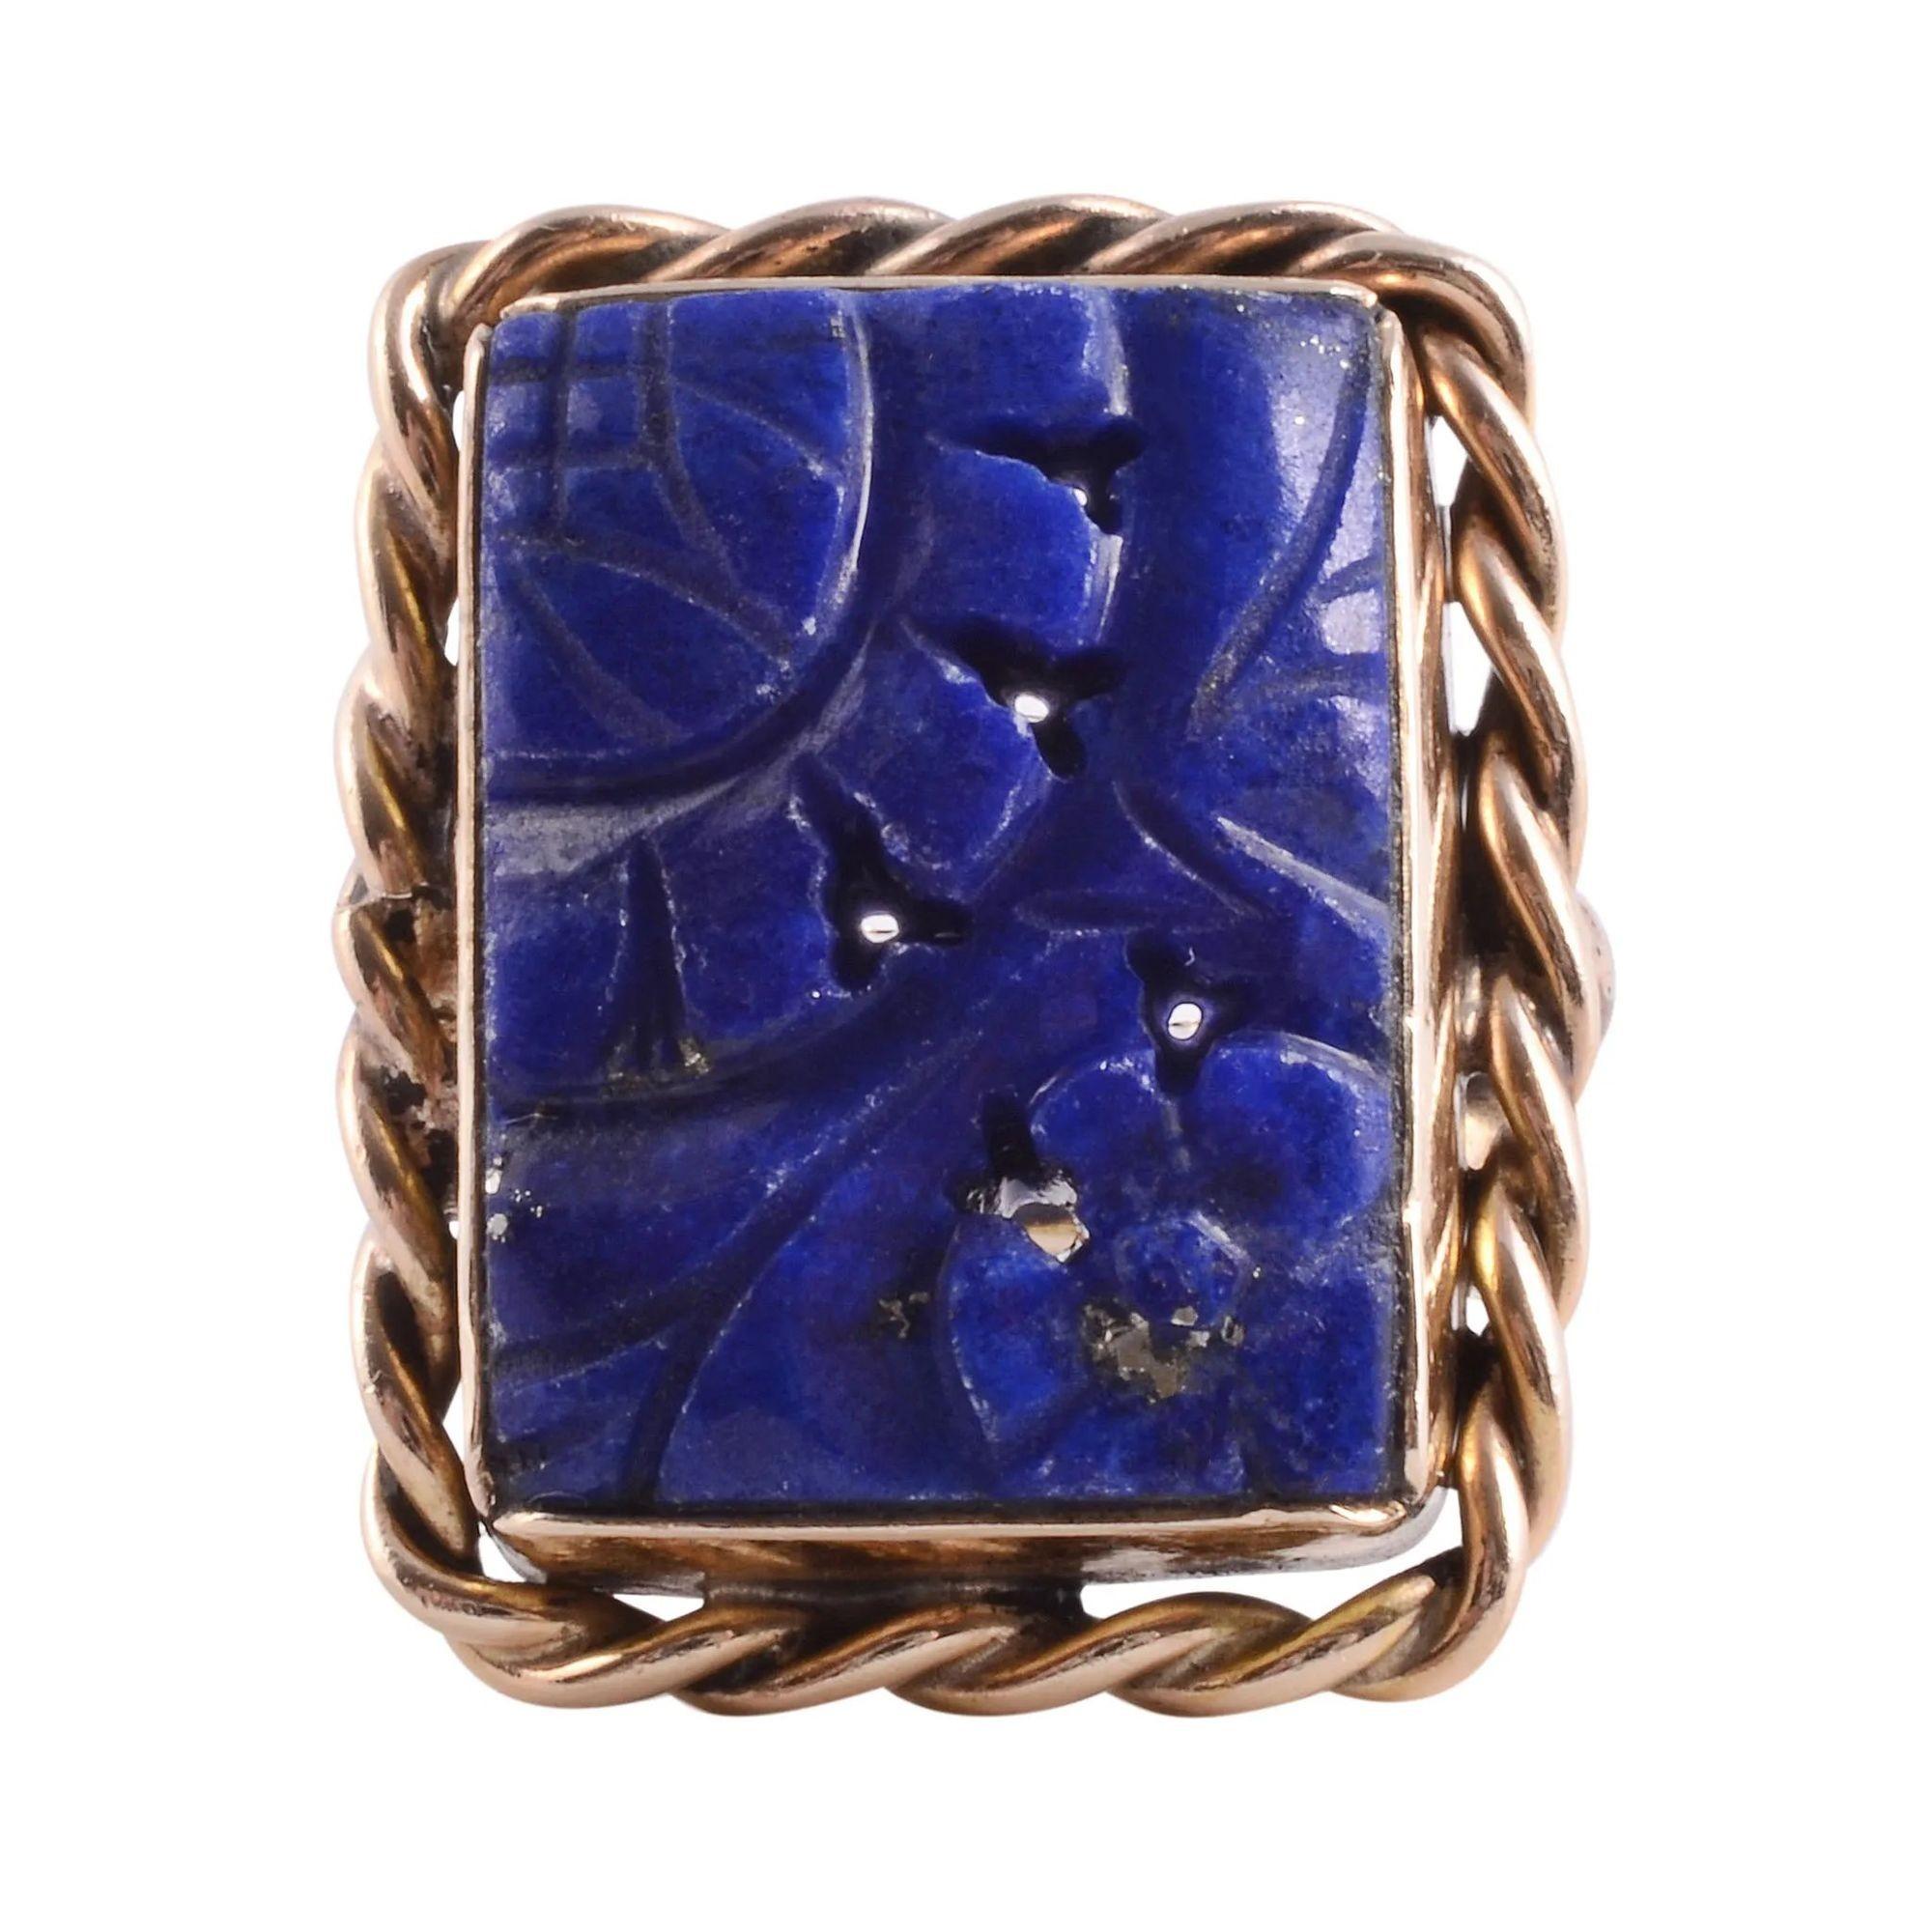 Vintage carved lapis 14KY ring, circa 1955. This 14 karat yellow gold ring features a rectangular carved lapis set in a twisted wire frame. This vintage lapis ring is a size 6. [KIMH 1881 P]

Dimensions
.95″H x .87″W x .25″D